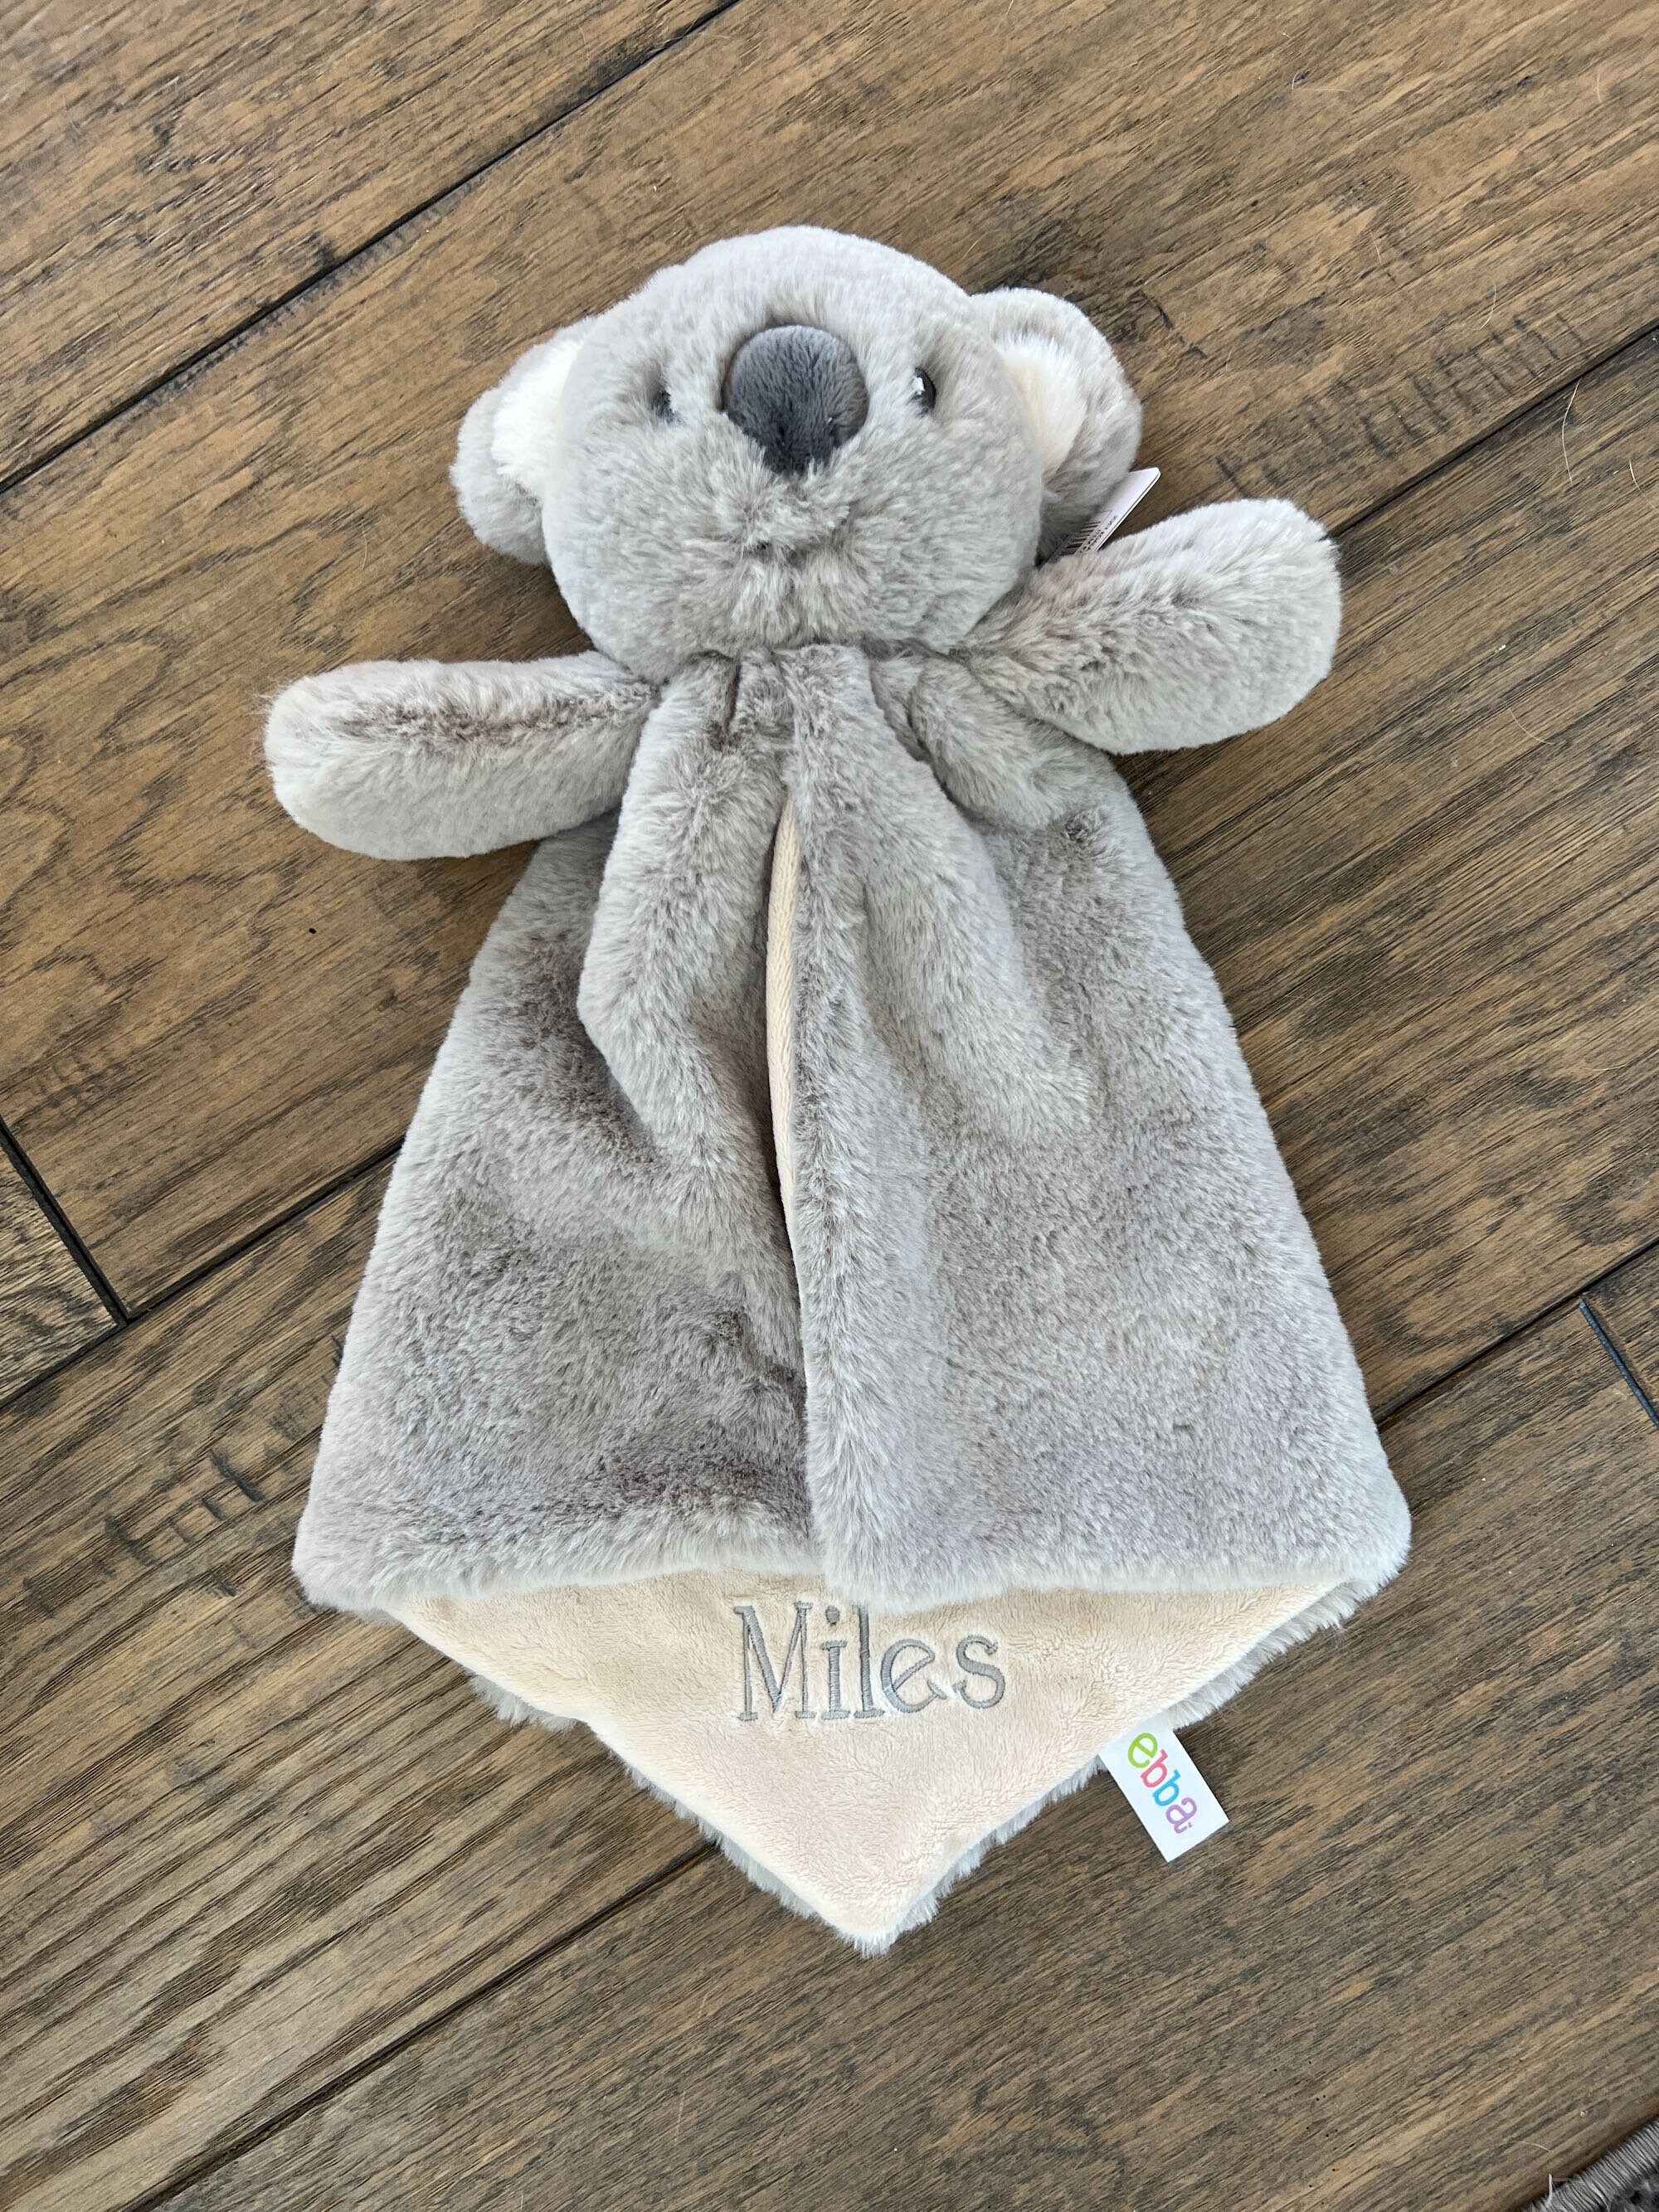 Personalized Animal Lovey Baby Shower Gift Baby Blanket pic pic